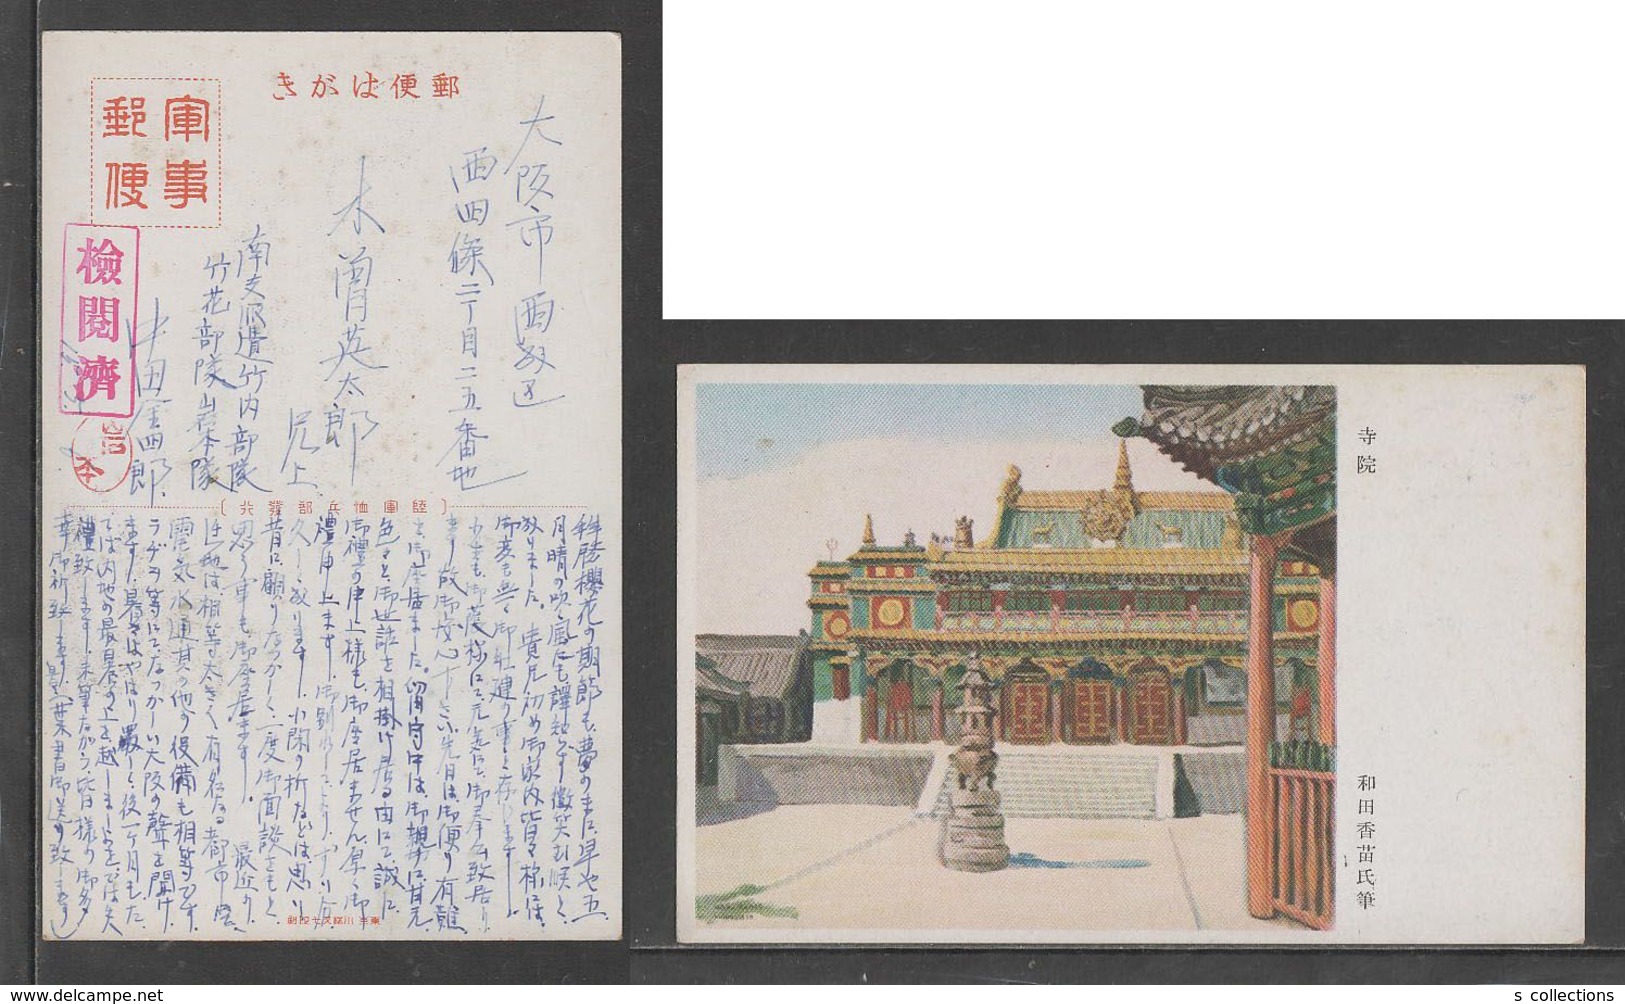 JAPAN WWII Military Temple Picture Postcard SOUTH CHINA WW2 MANCHURIA CHINE MANDCHOUKOUO JAPON GIAPPONE - 1943-45 Shanghai & Nanjing